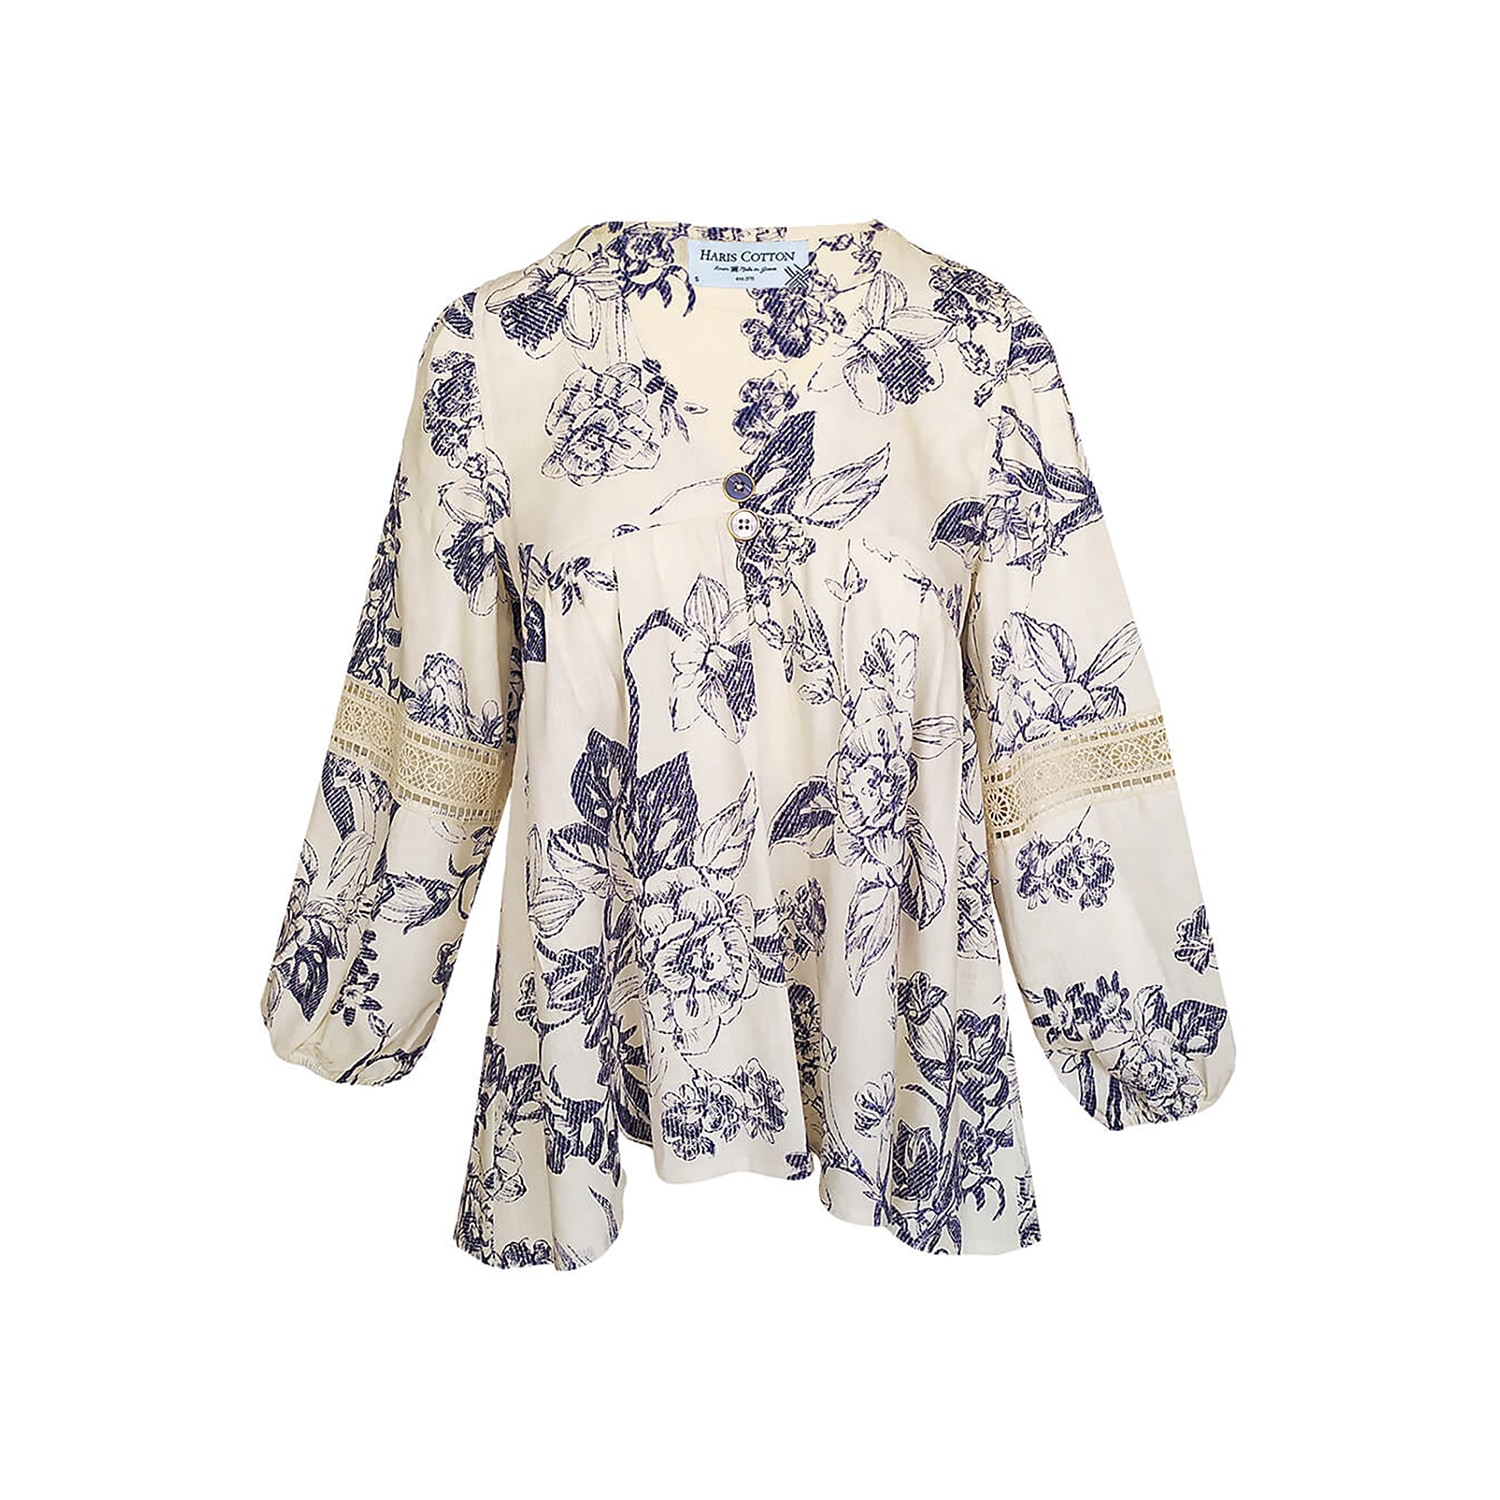 Women’s Printed Linen Blend Blouse With Ballon Sleeves And Lace - Blue Spring Extra Small Haris Cotton